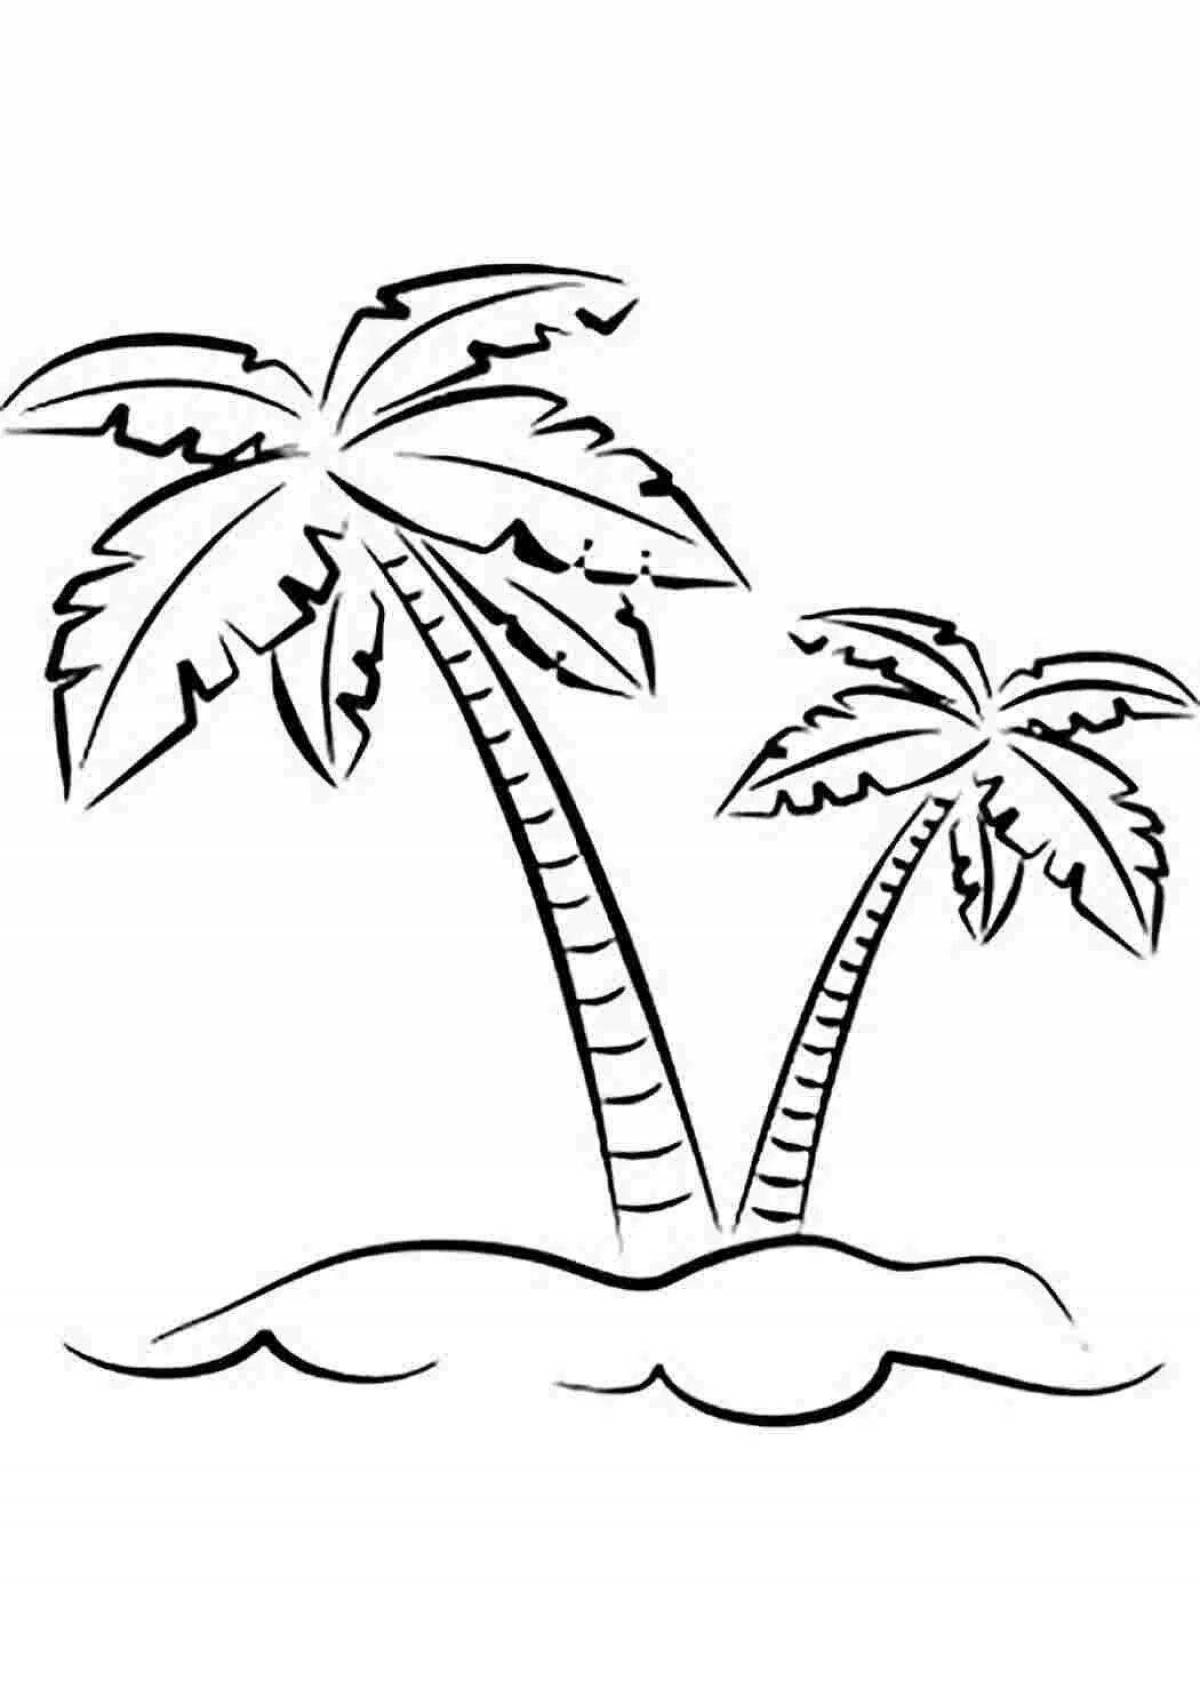 Coloring page gorgeous desert island